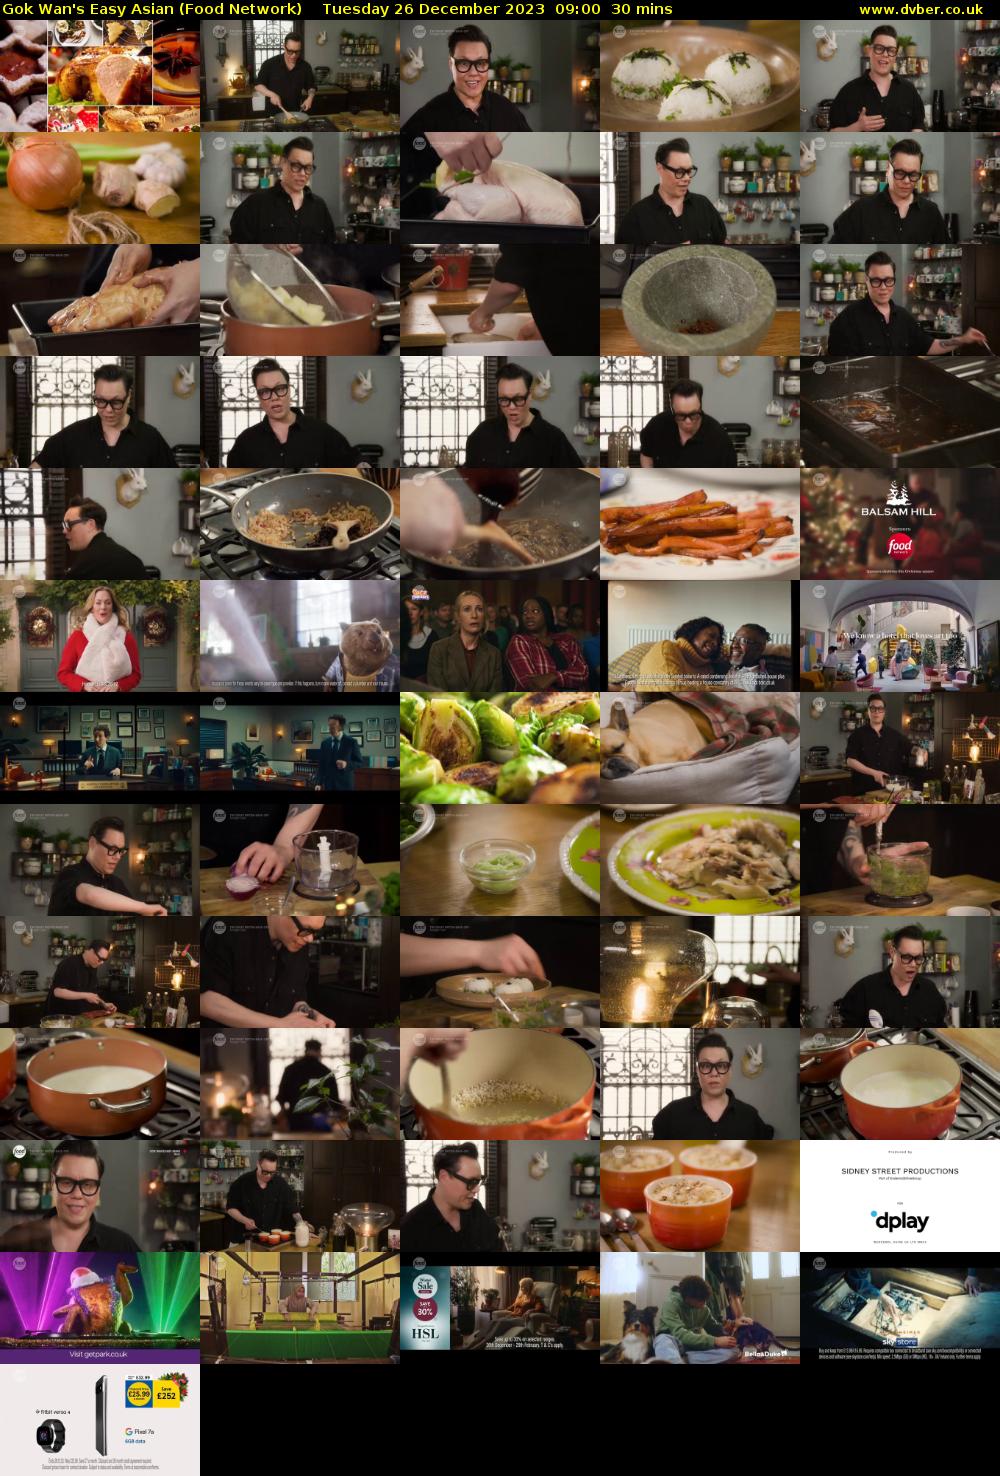 Gok Wan's Easy Asian (Food Network) Tuesday 26 December 2023 09:00 - 09:30